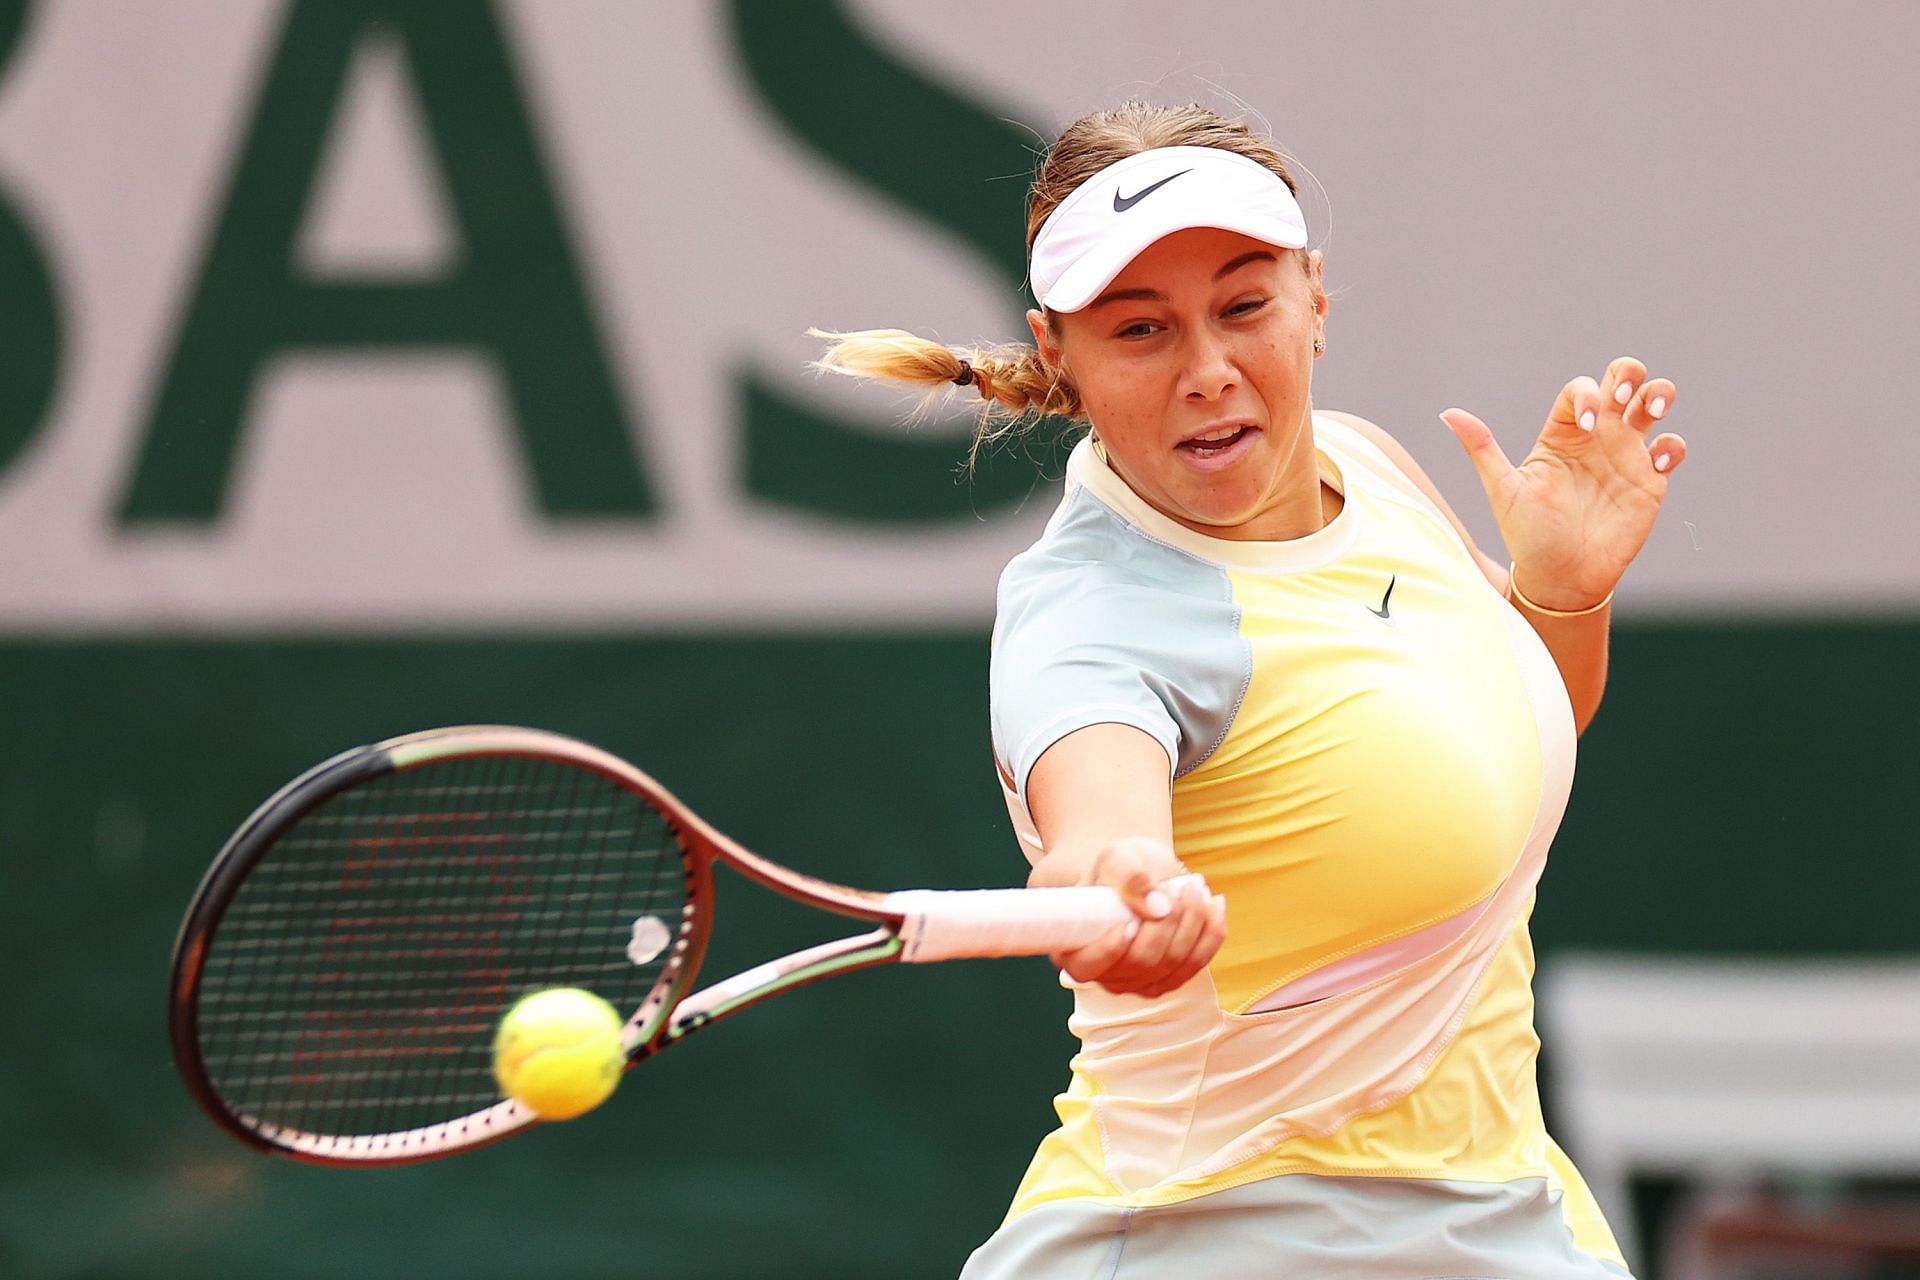 Amanda Anisimova in action at the 2022 French Open